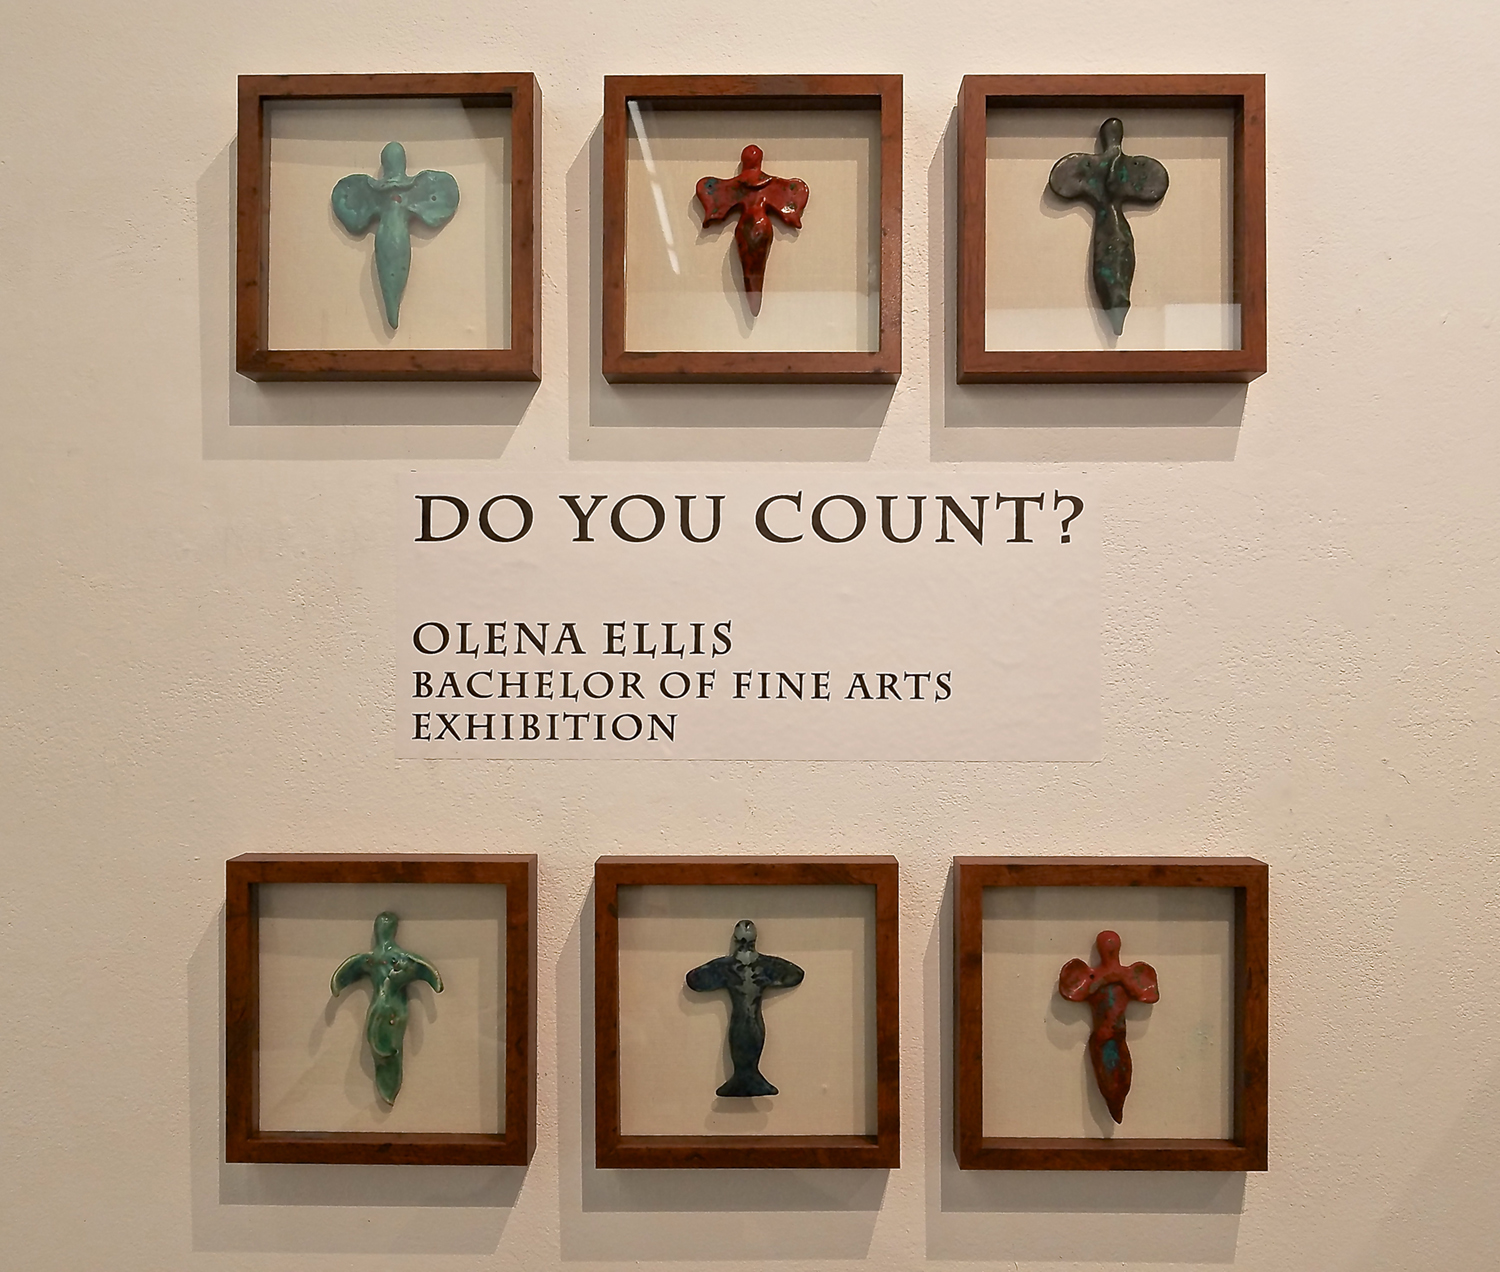 6 small ceramic goddesses, each in its own shadow box, surround the exhibit show title 'Do You Count?" Photo by Olena Ellis